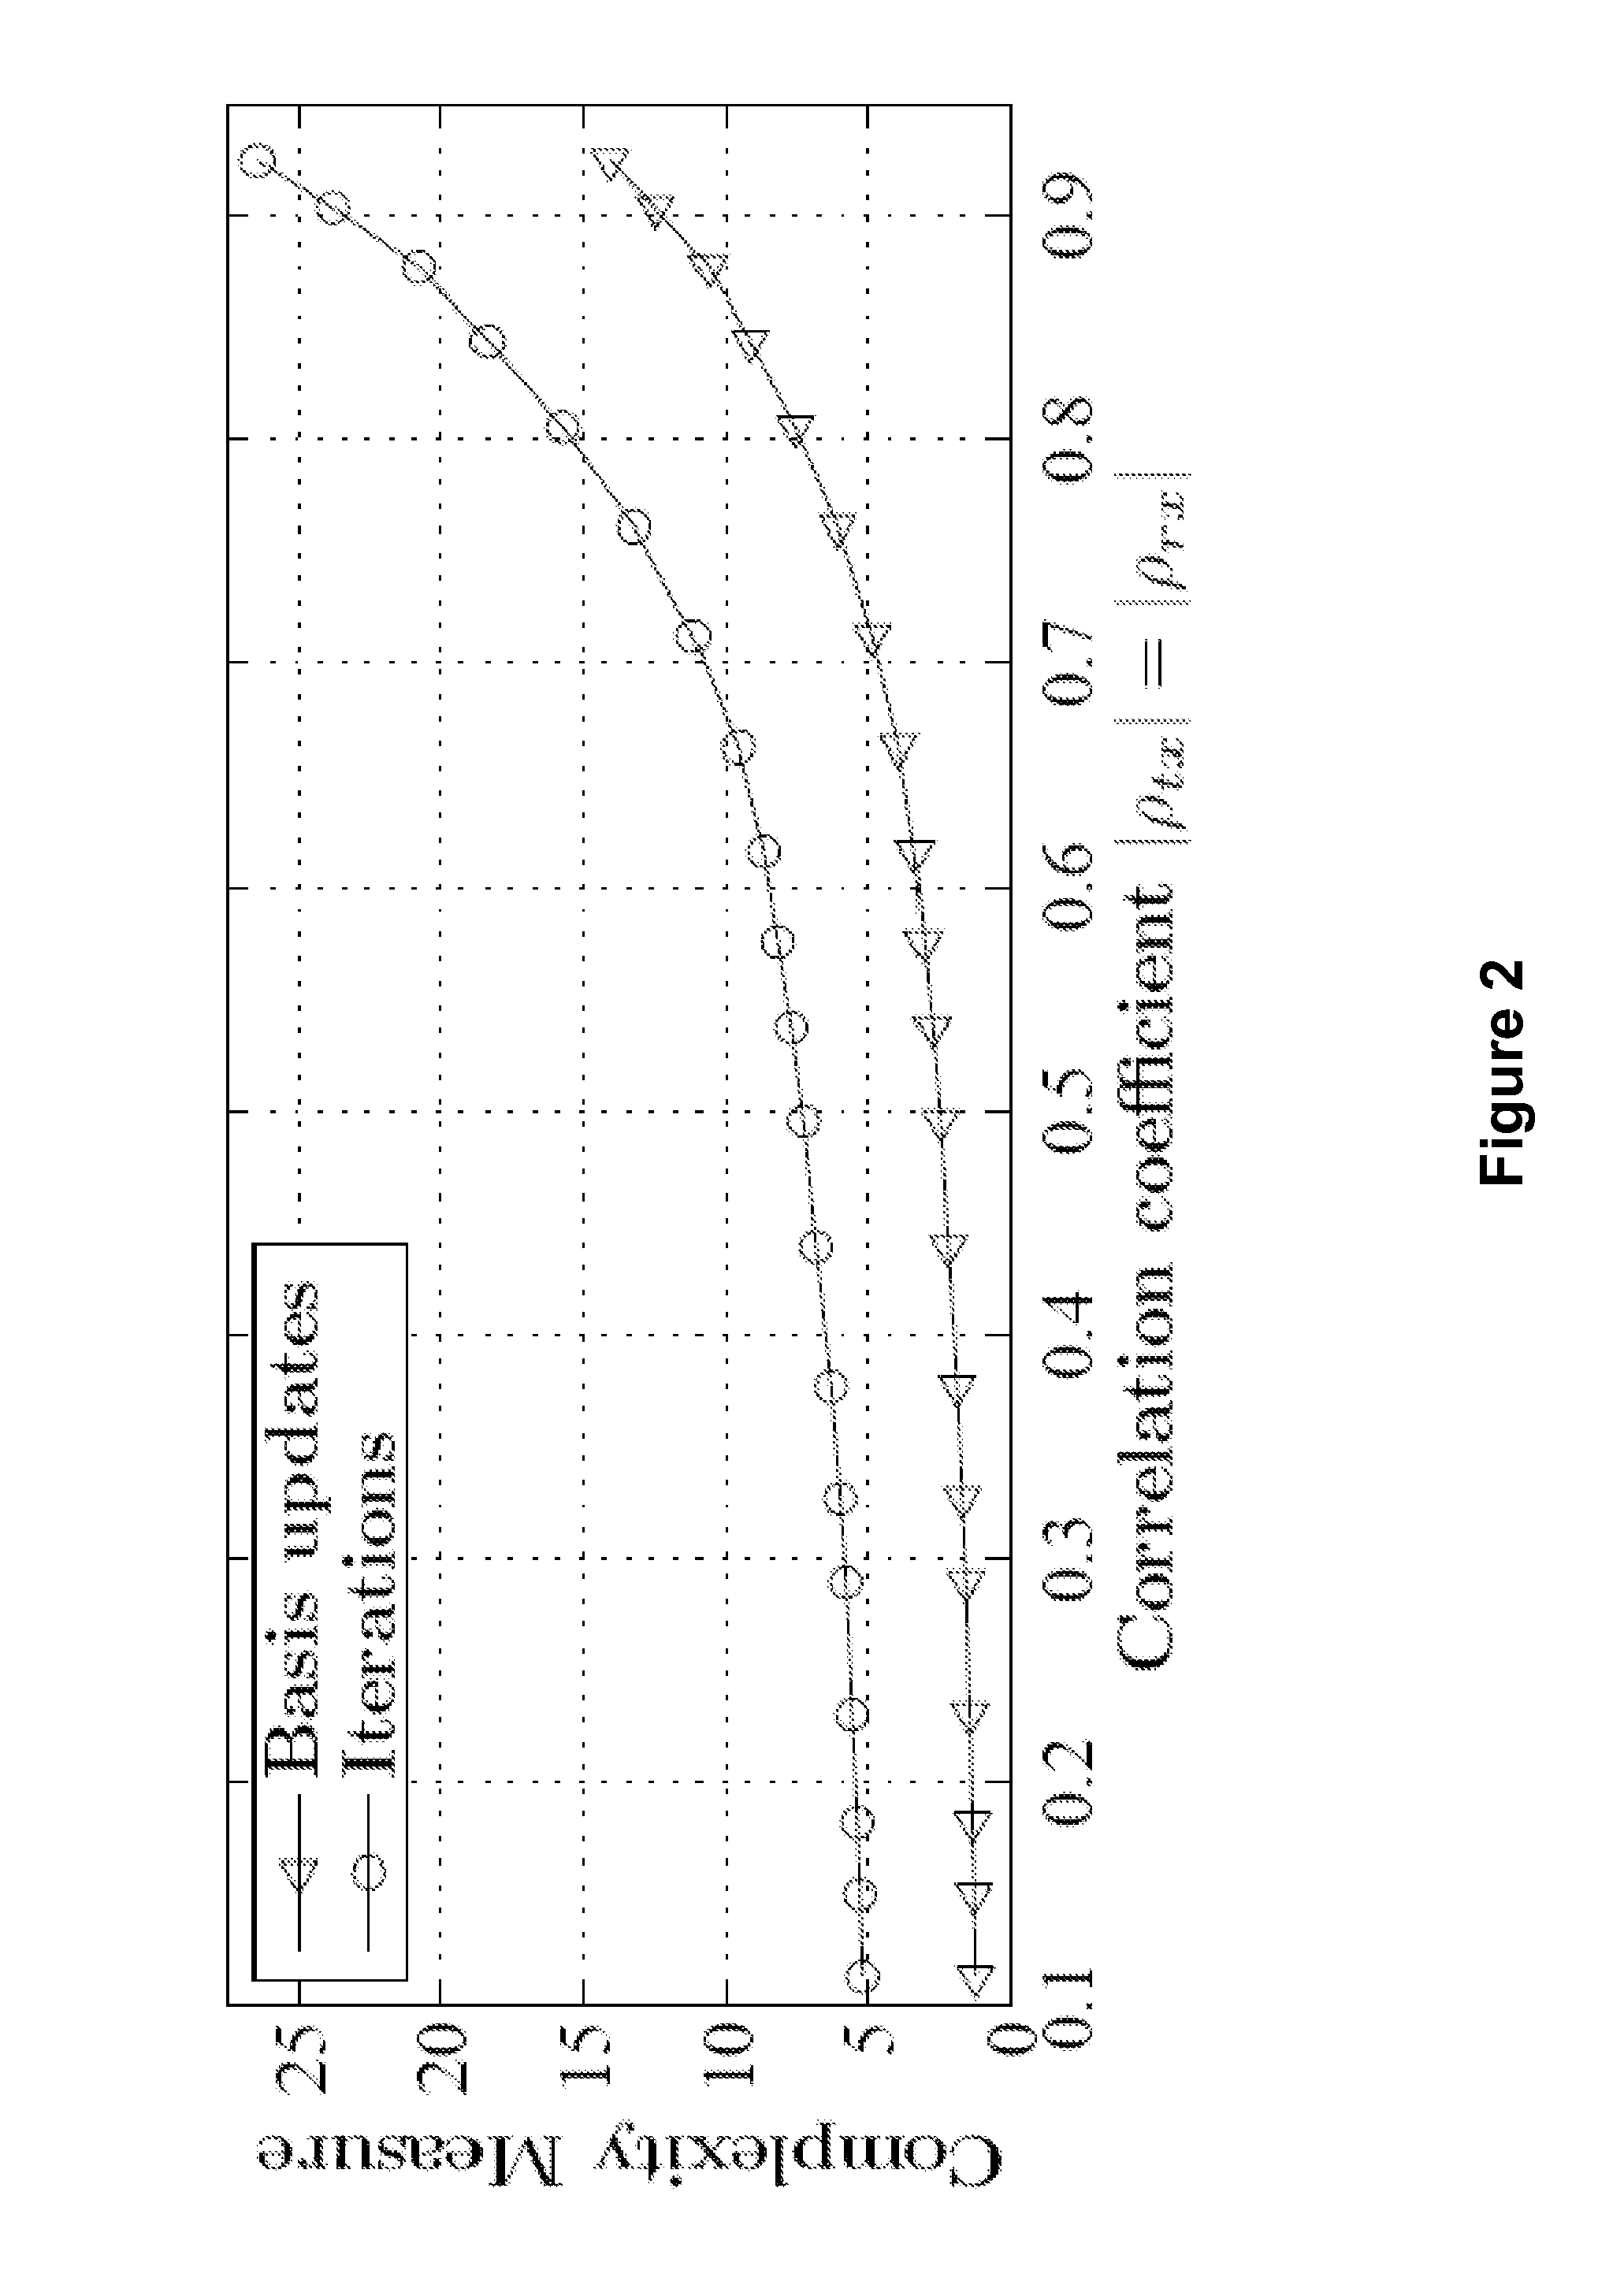 Incremental lattice reduction systems and methods